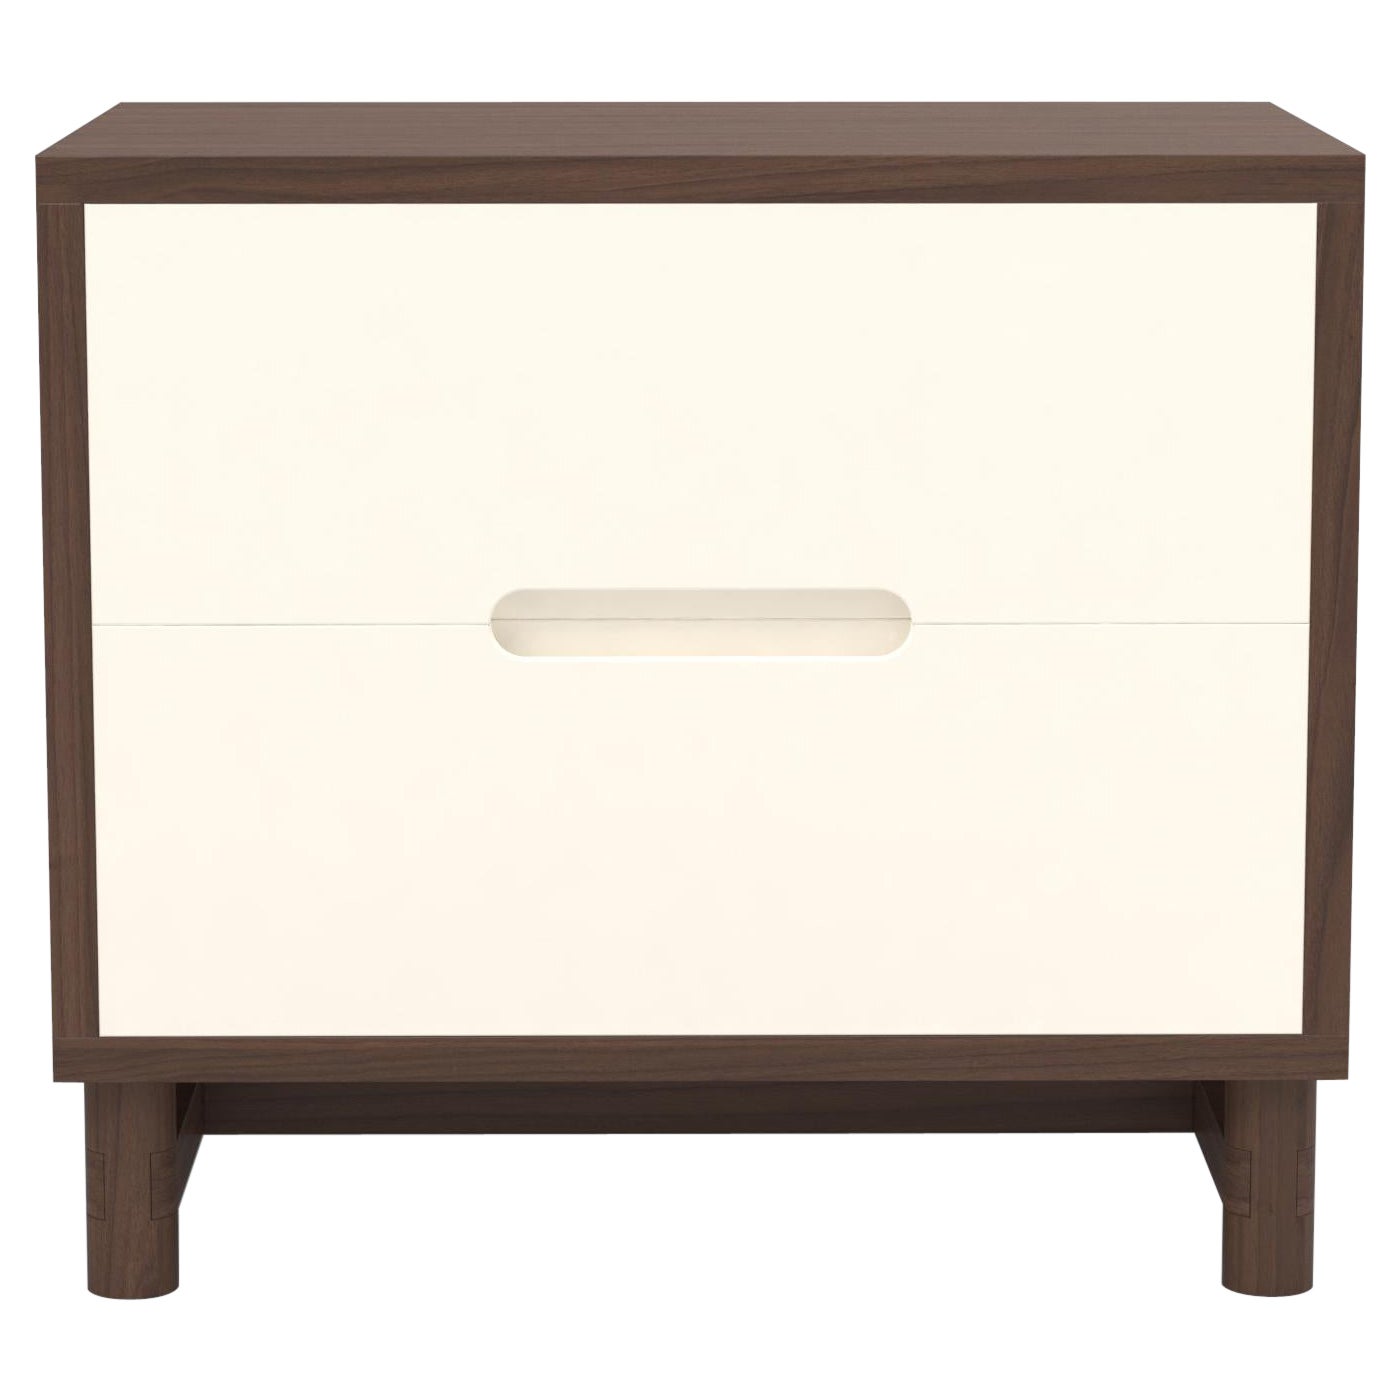 Oak Two '2' Drawer Bedside Table Shown in Natural Oak Wood with Clear Lacquer